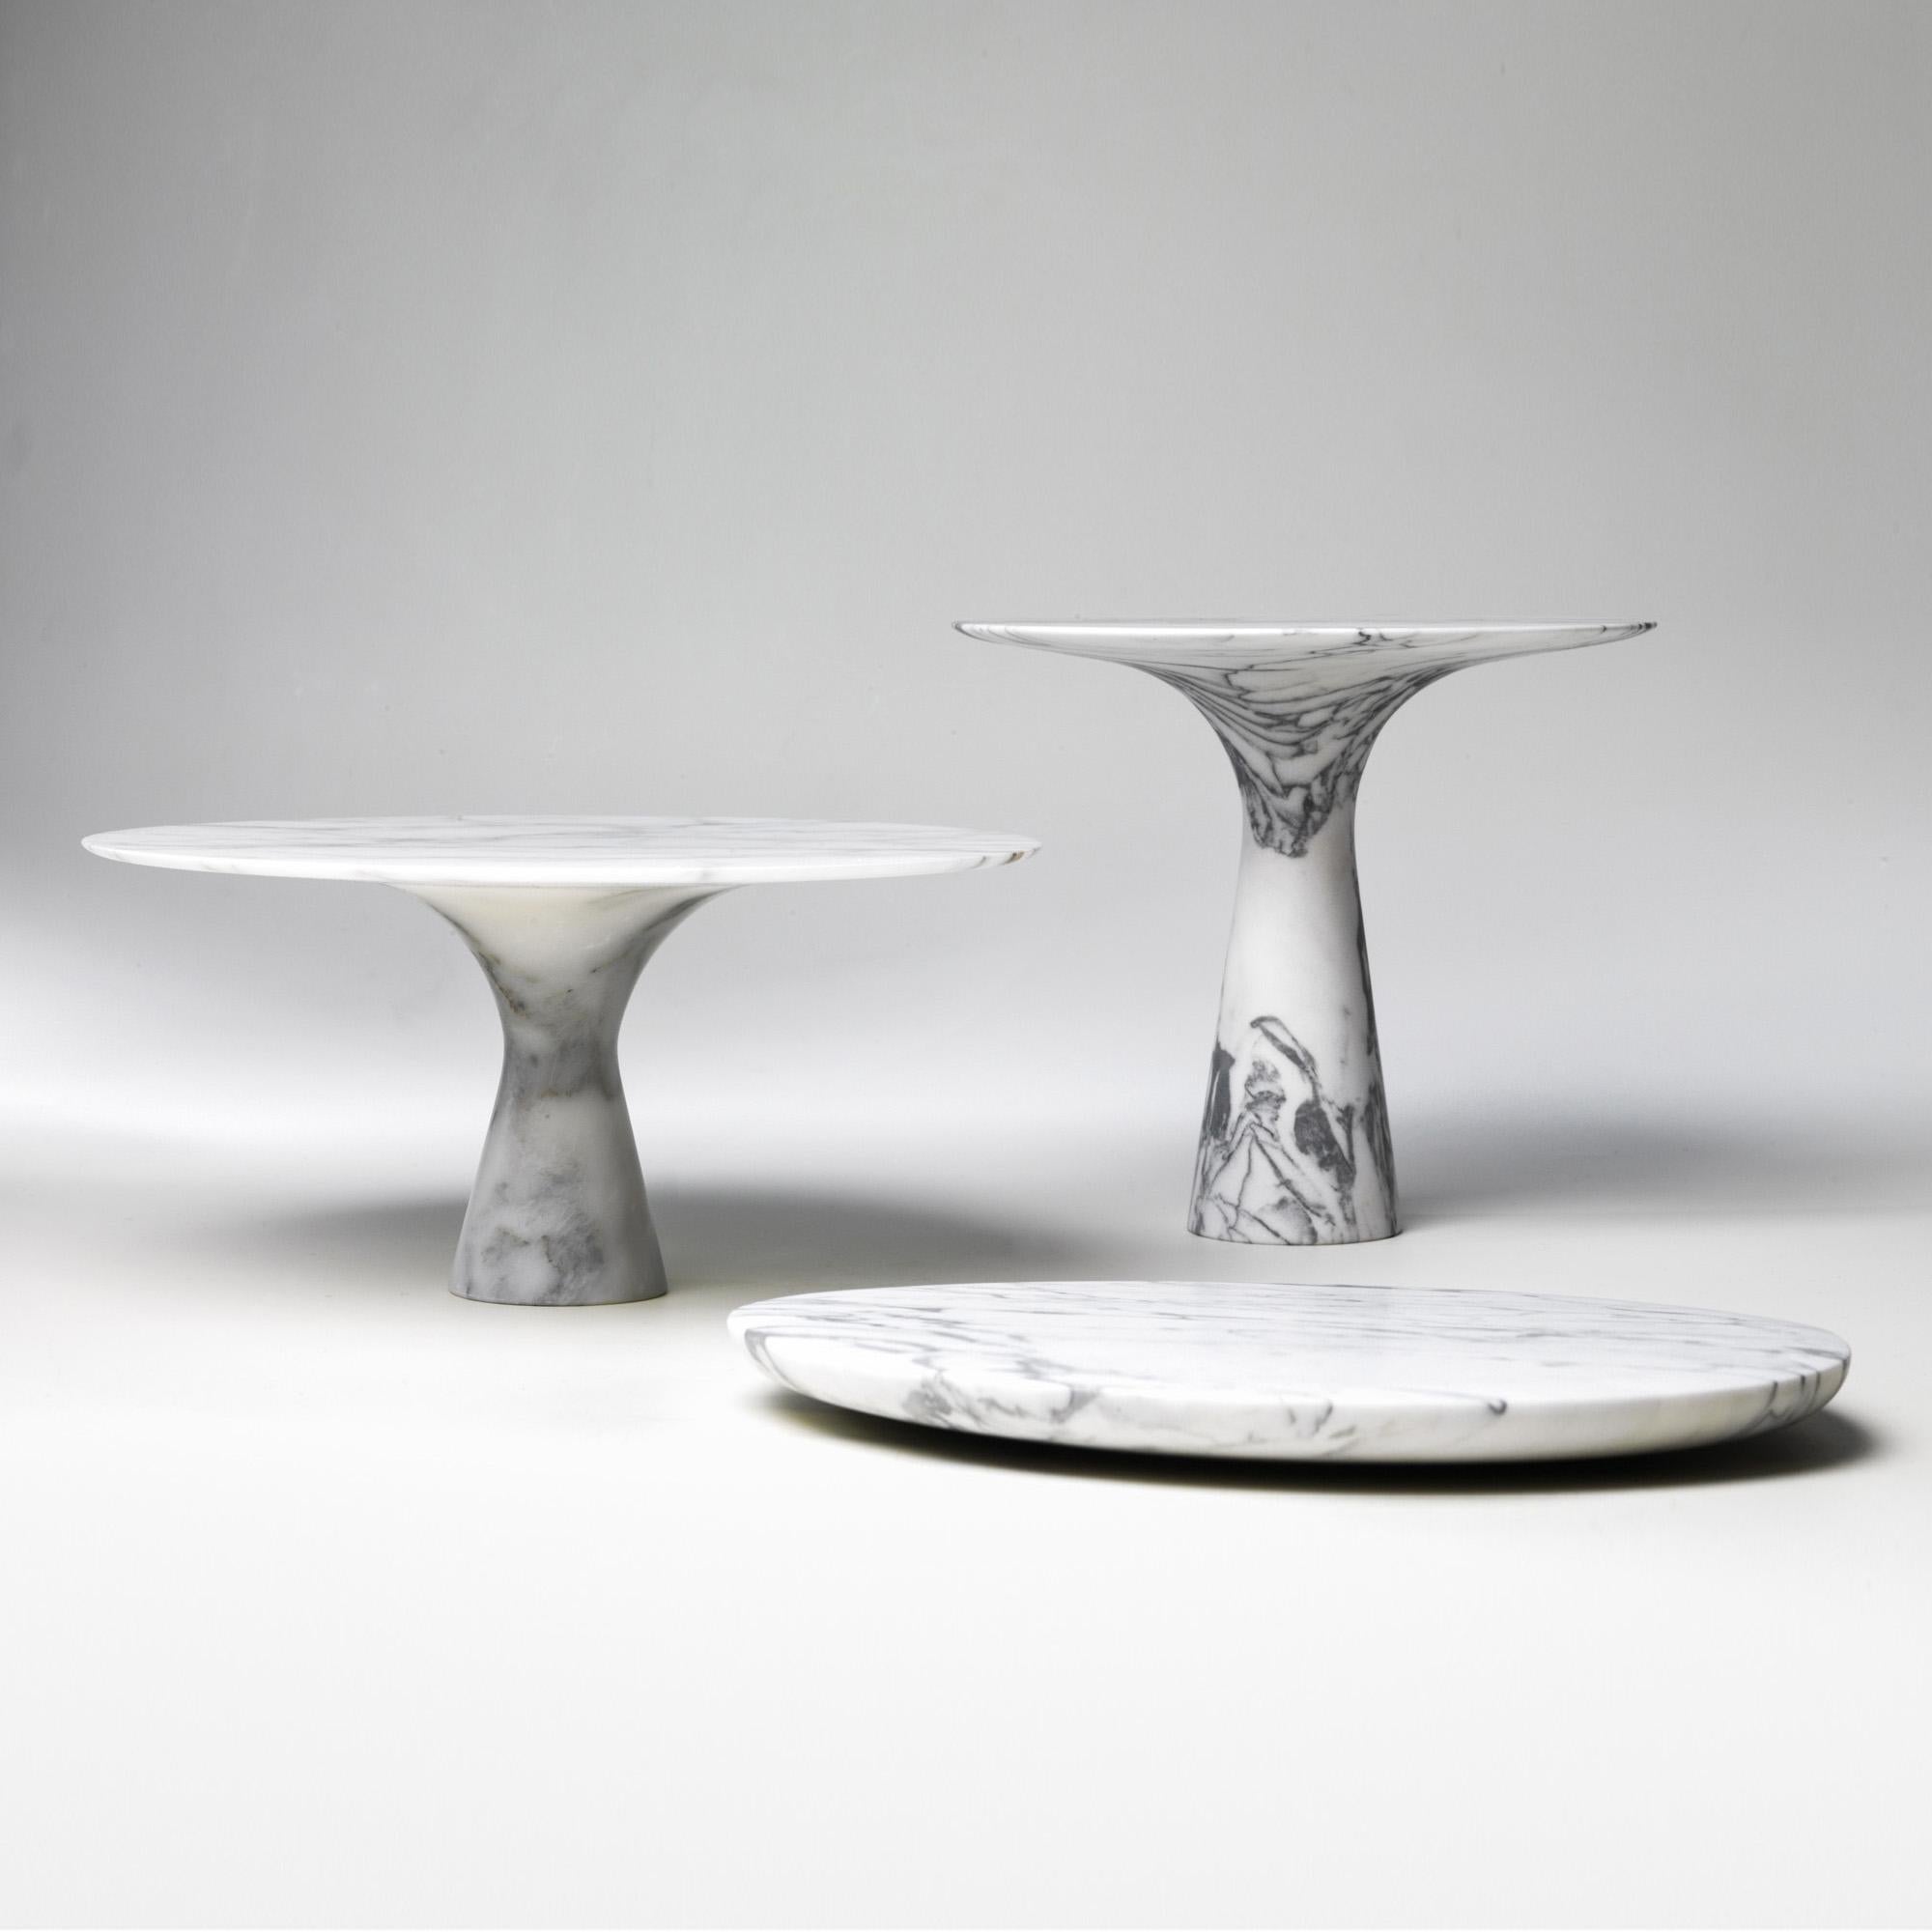 Set of 3 Refined Contemporary Marble Bianco Statuarietto Cake Stands and Plate
Signed by Leo Aerts.
Dimensions: 
D 26 x H 22.5 cm 
D 32 x H 15 cm
D 32 x H 2 cm
Material: Bianco Statuarietto marble
Technique: Polished, carved. 

Available in marble: